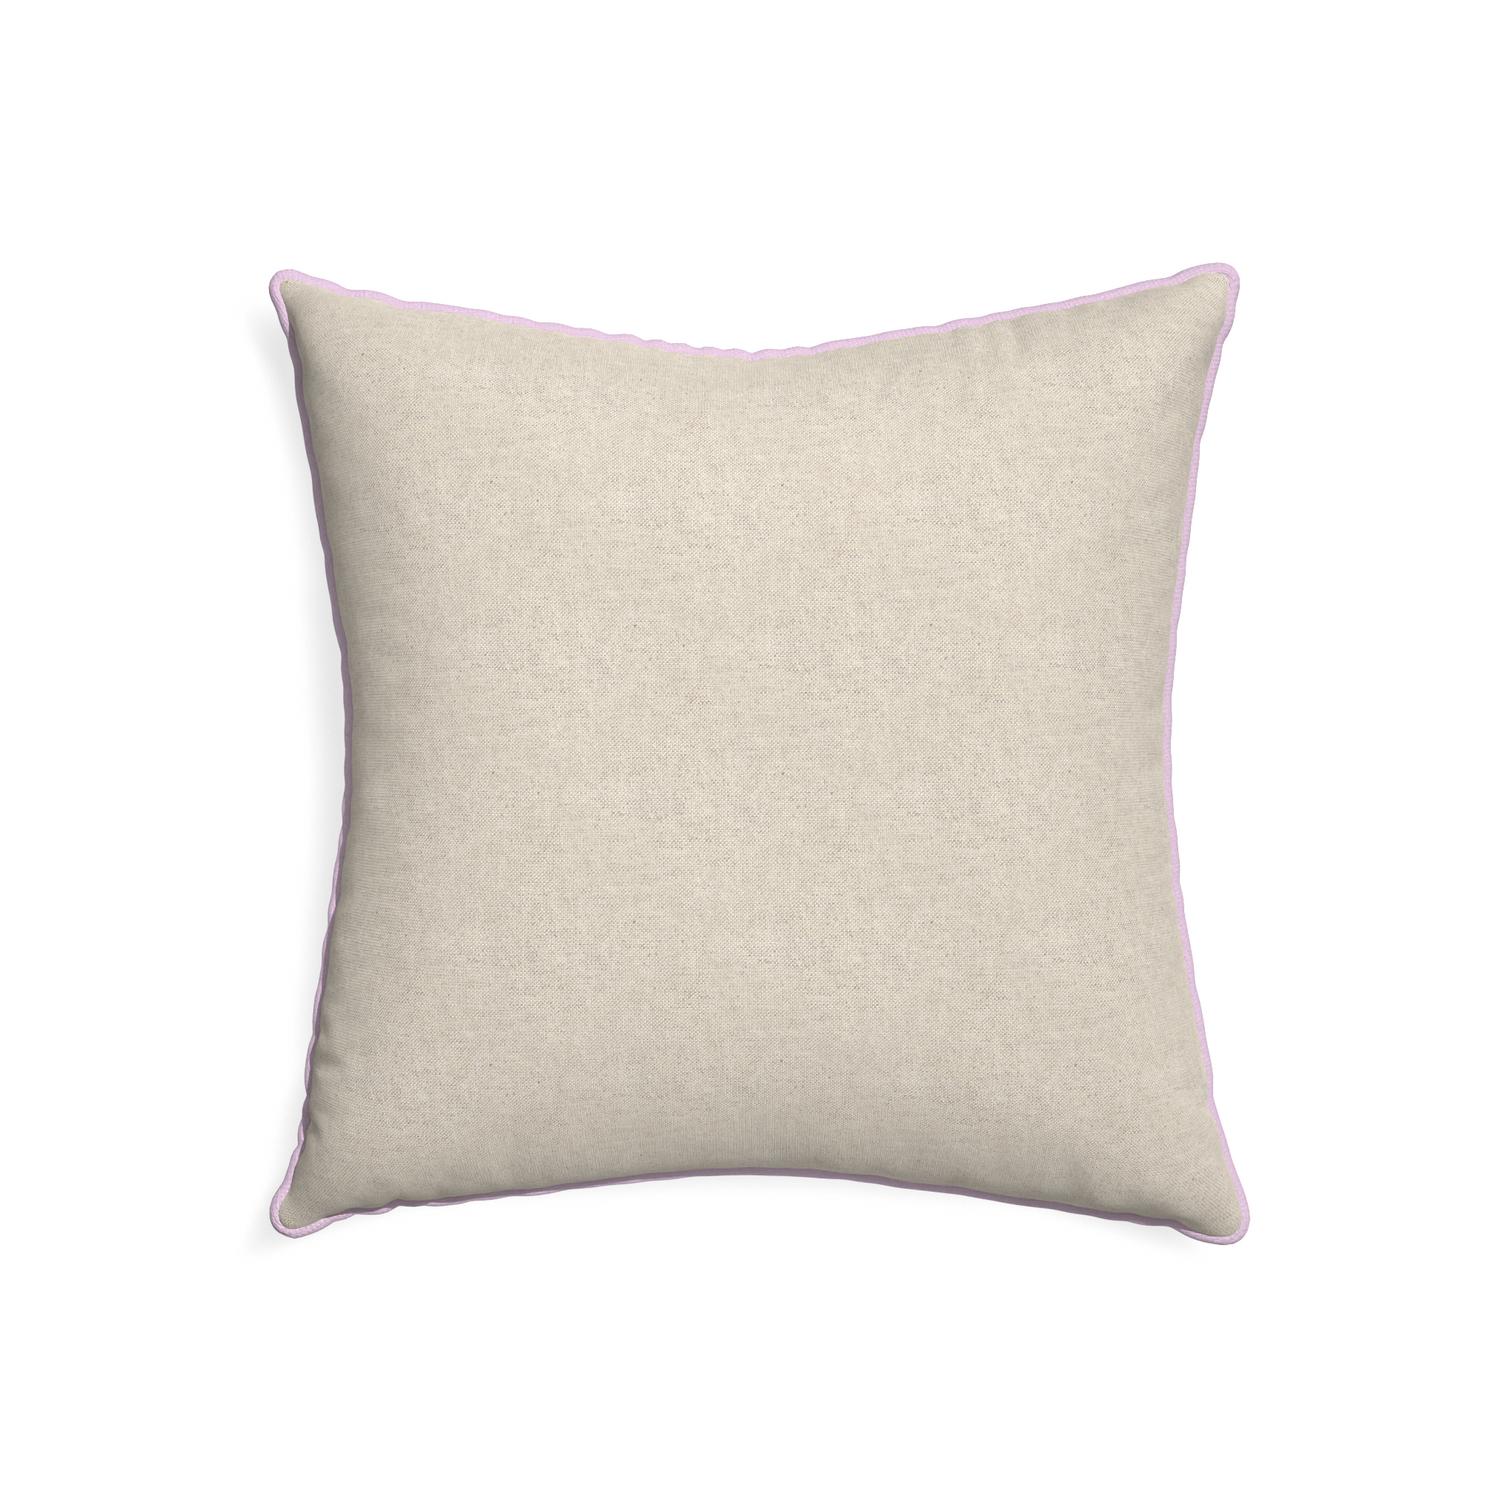 22-square oat custom light brownpillow with l piping on white background